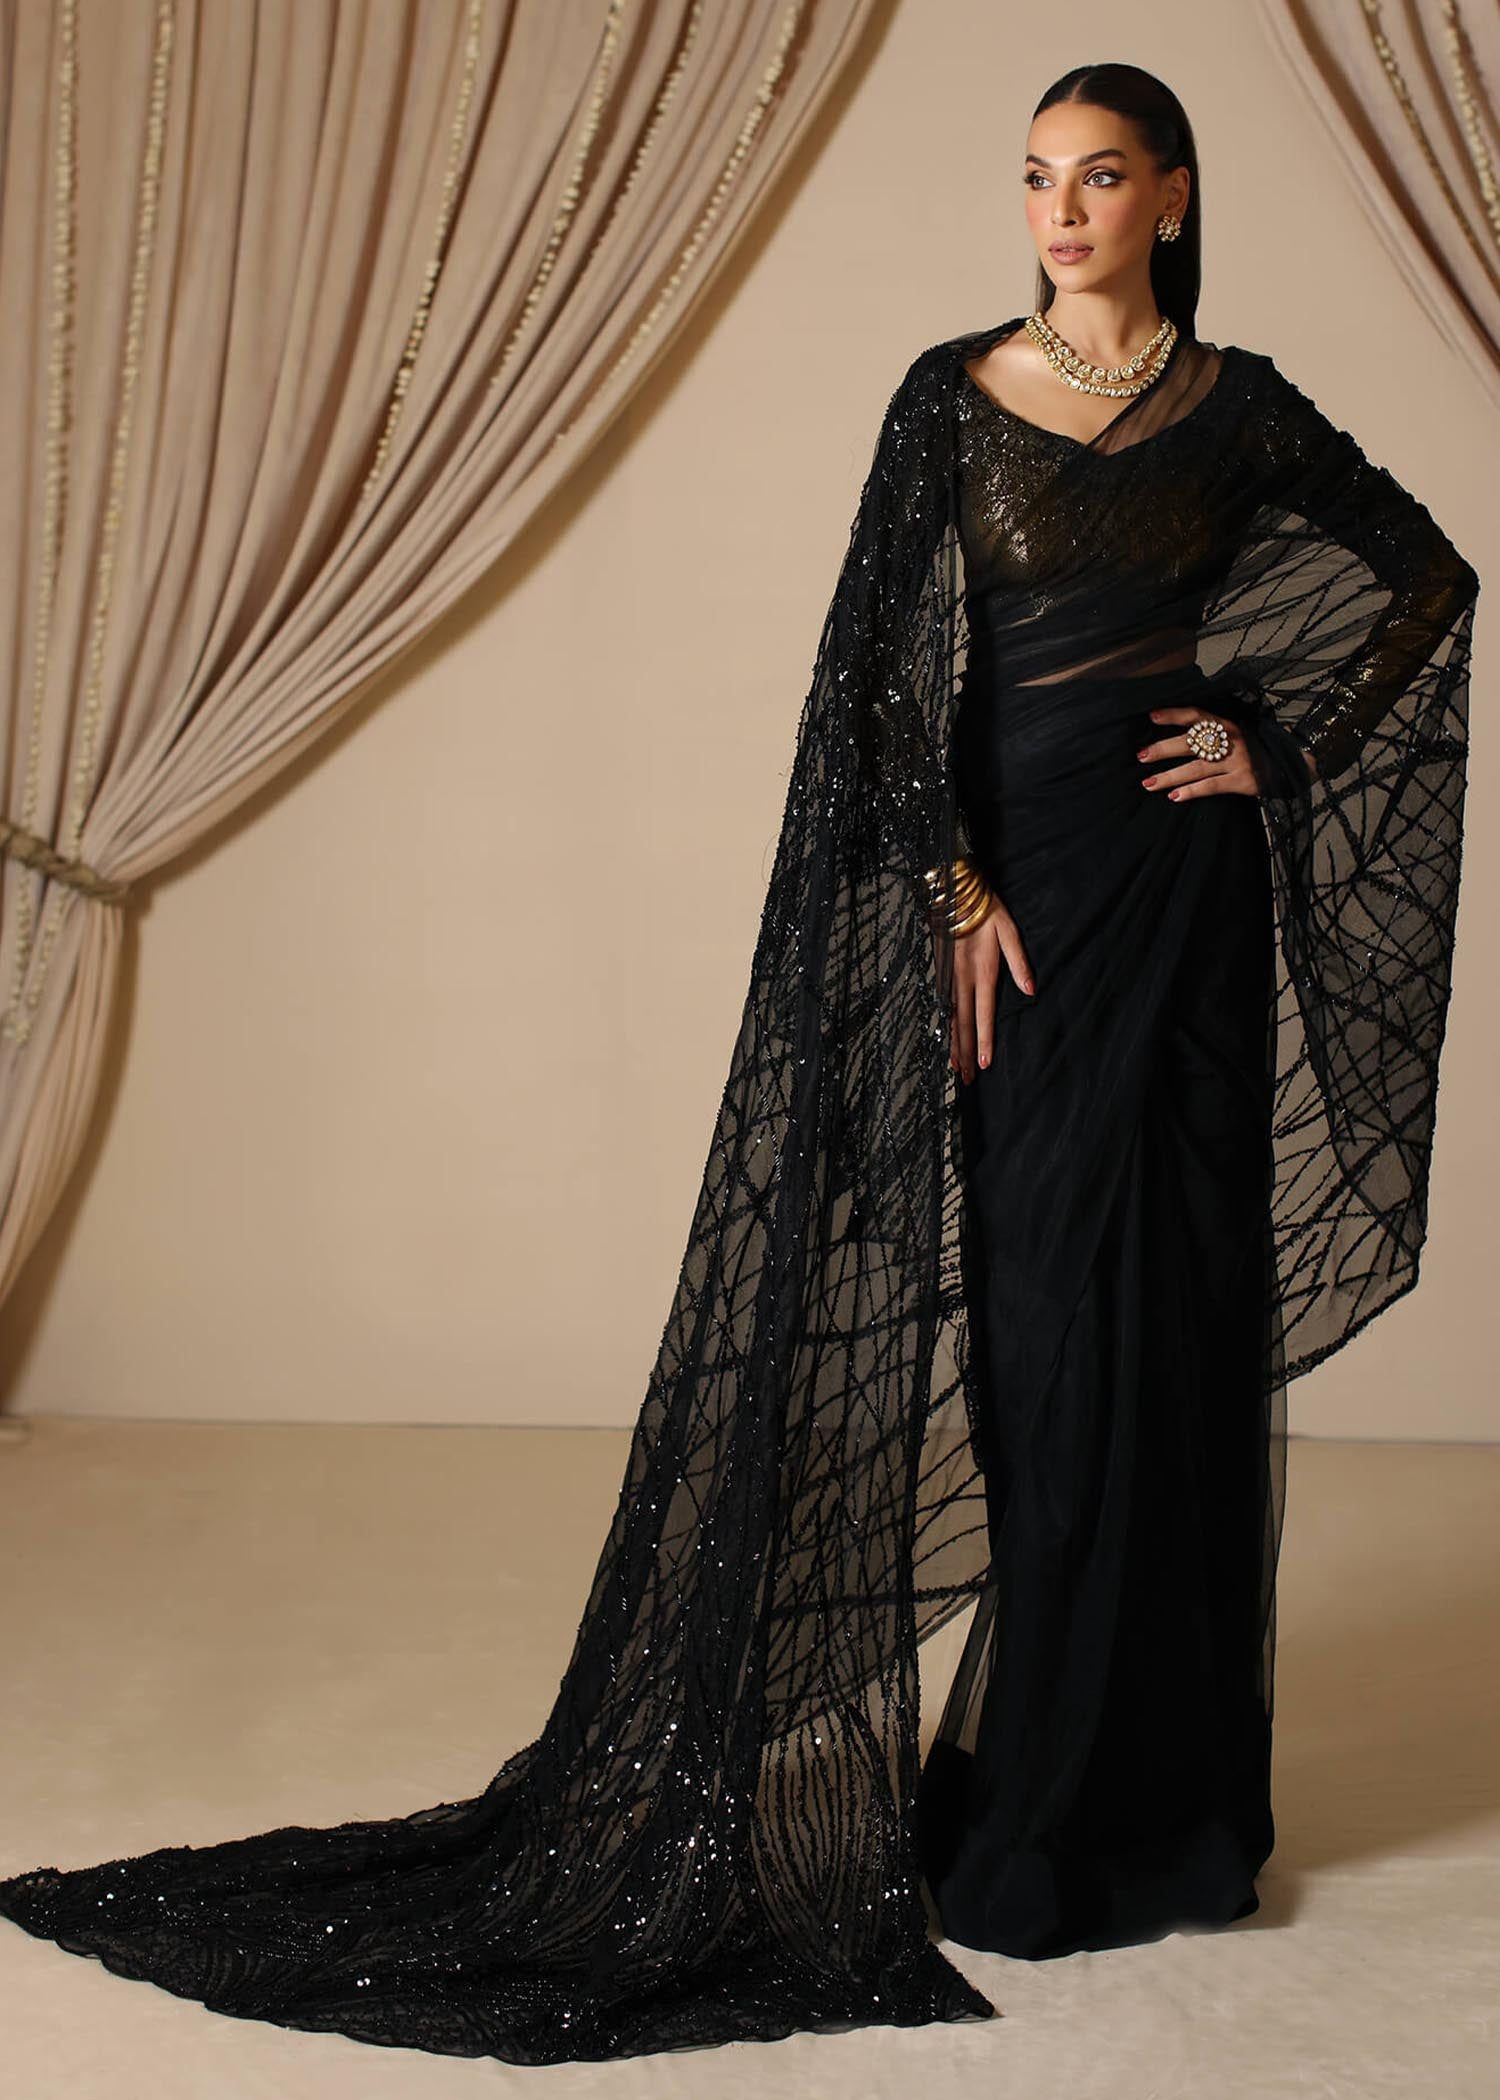 Embrace Tradition with Elegant Black Sarees